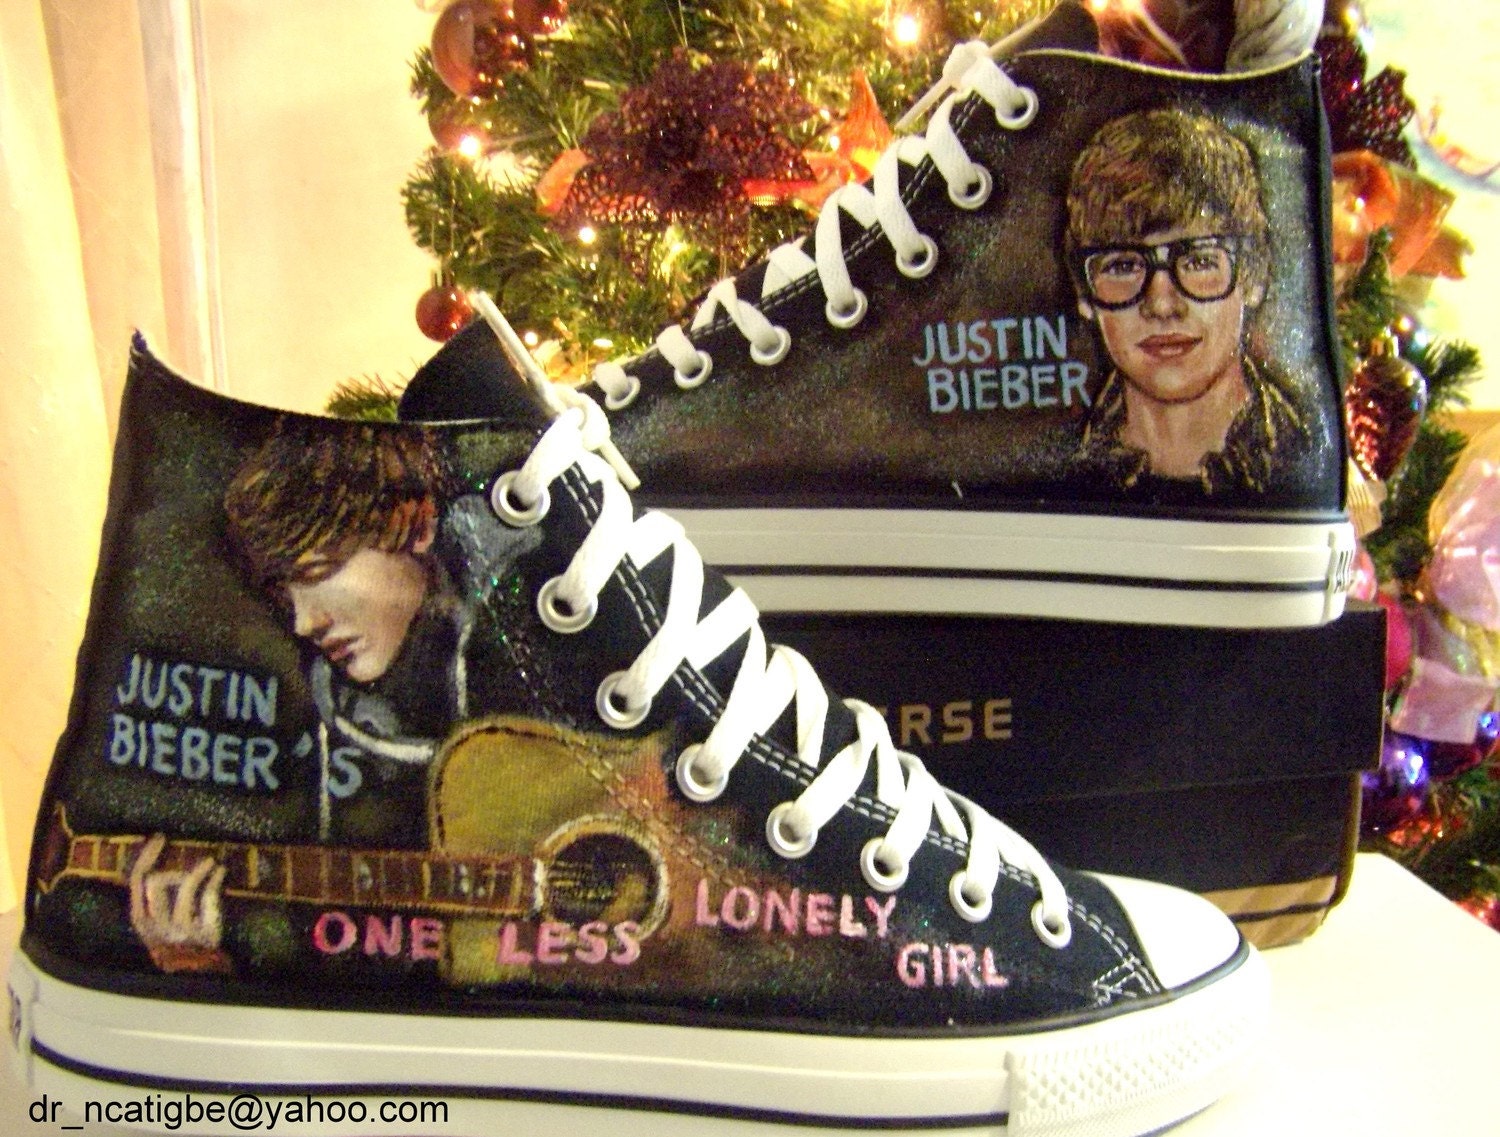 Justin Bieber's One Less Lonely Girl hand painted Converse